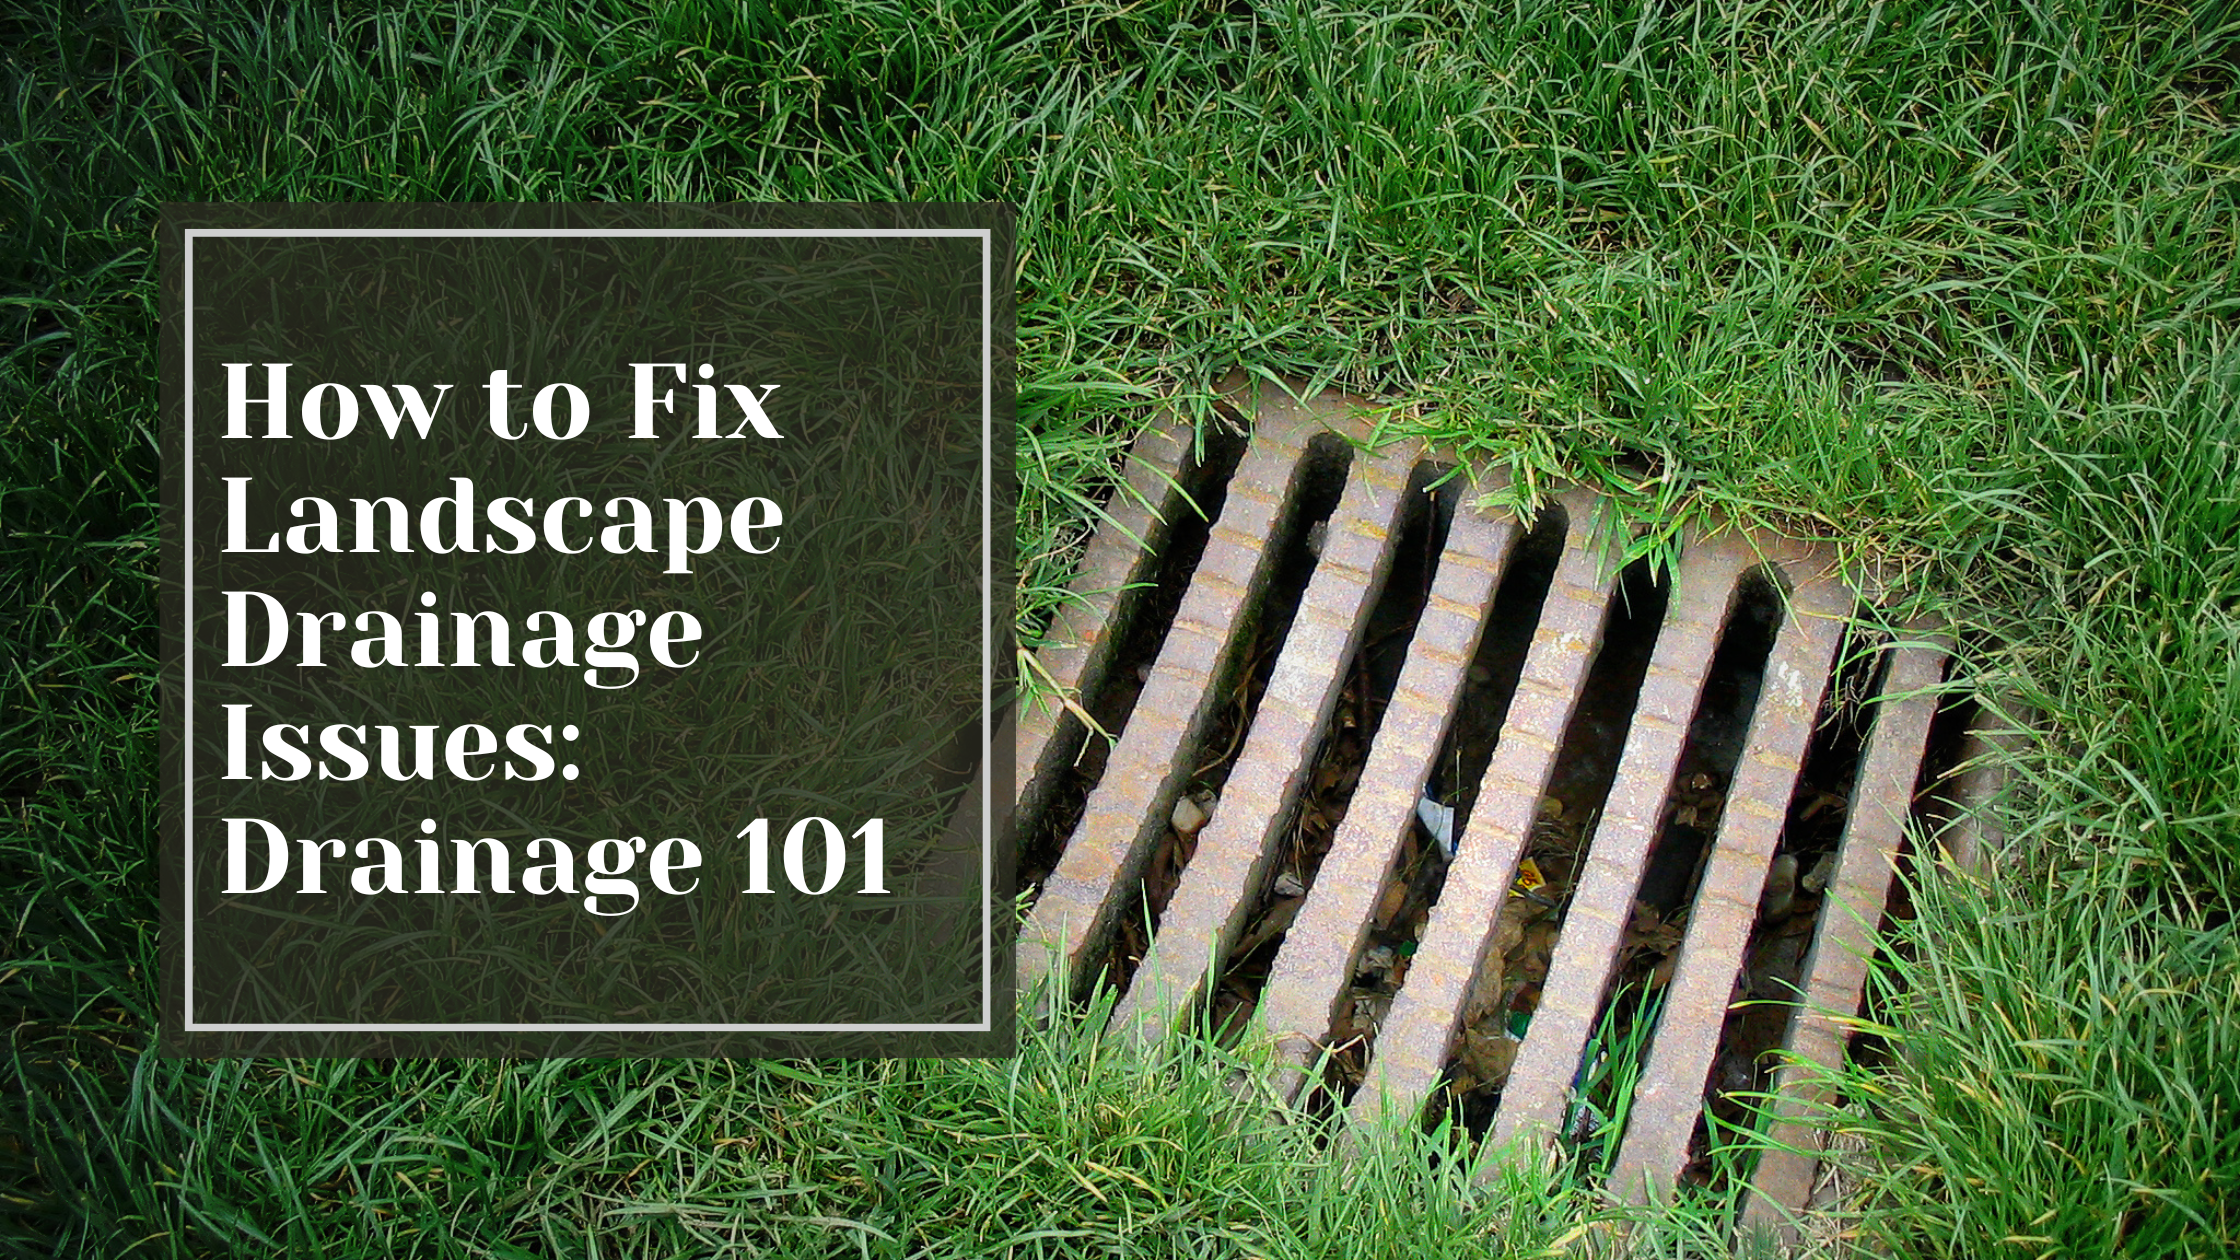 How to Fix Landscape Drainage Issues: Drainage 101